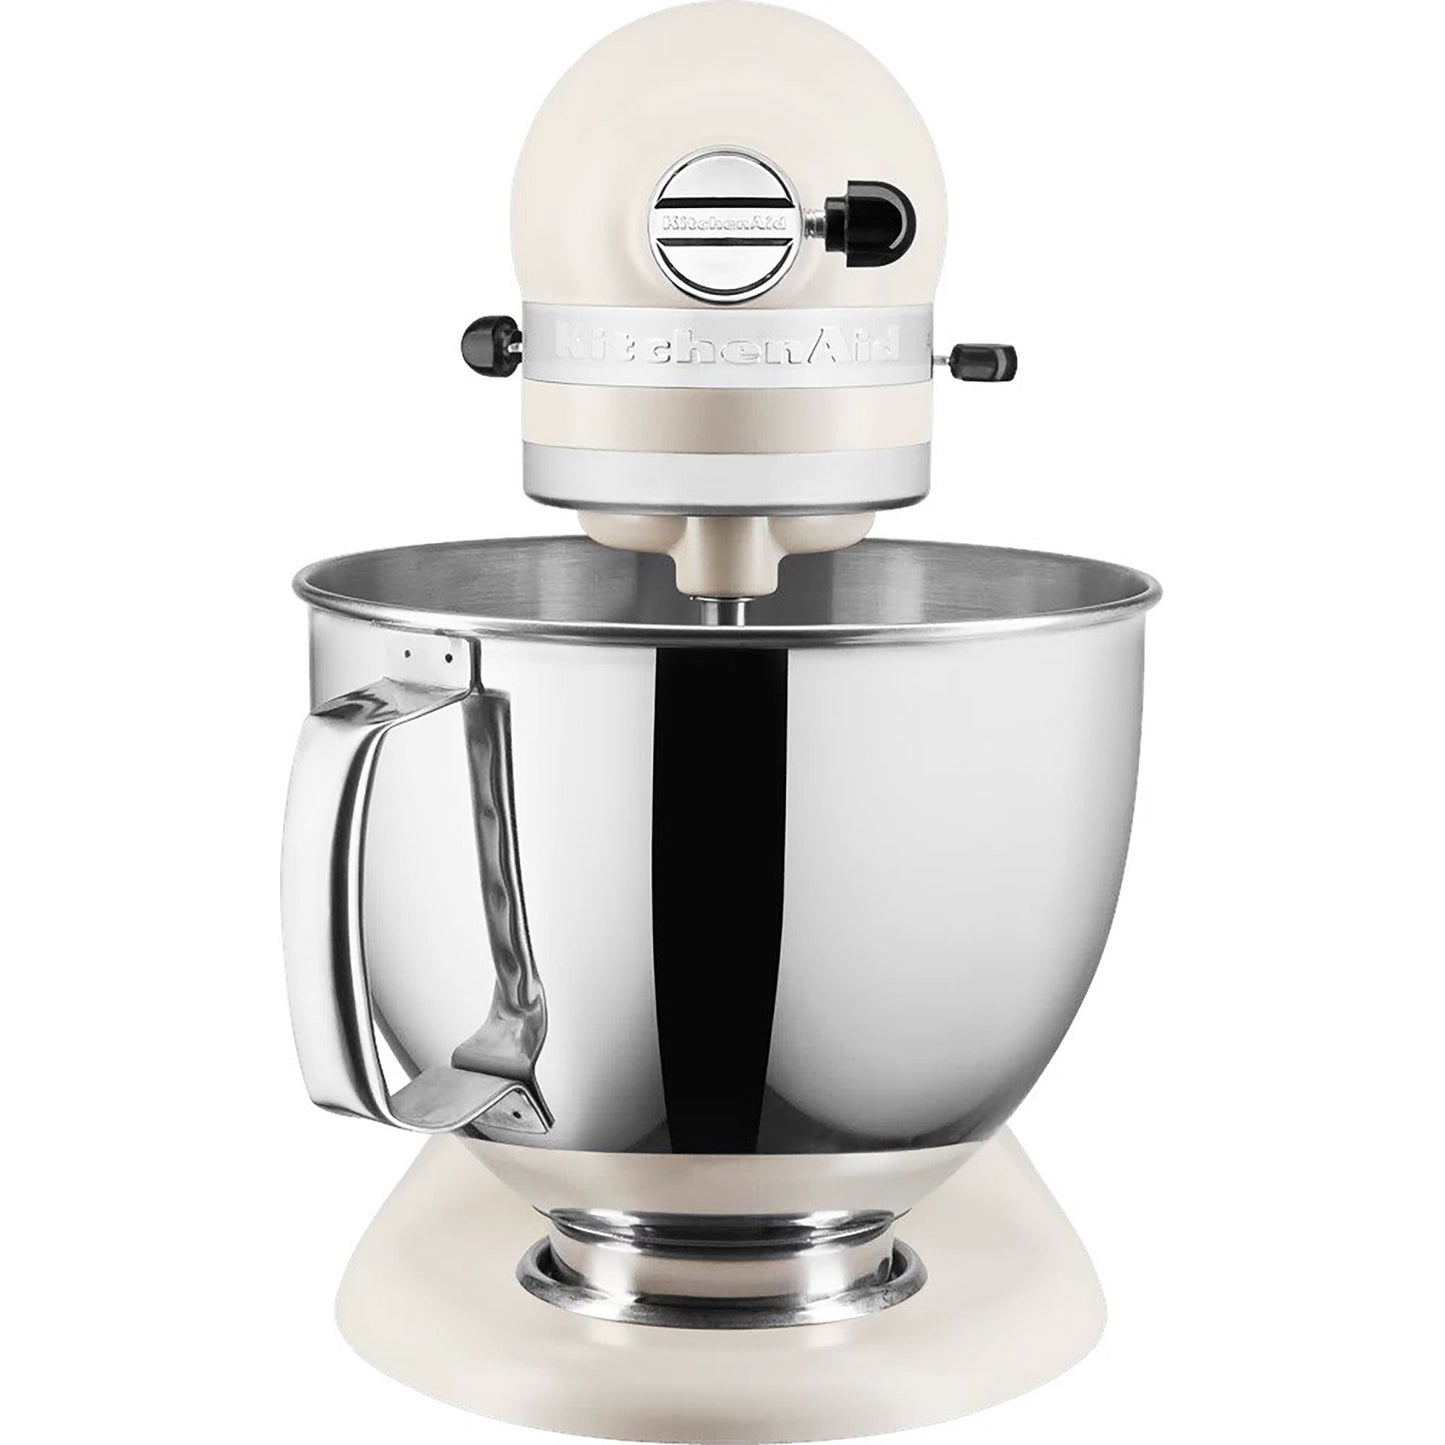 KitchenAid ™ Artisan Mixer 4.8L Porcelain White - Includes Wire Whisk, Dough Hook and Flat Beater (SKSM125BPL)